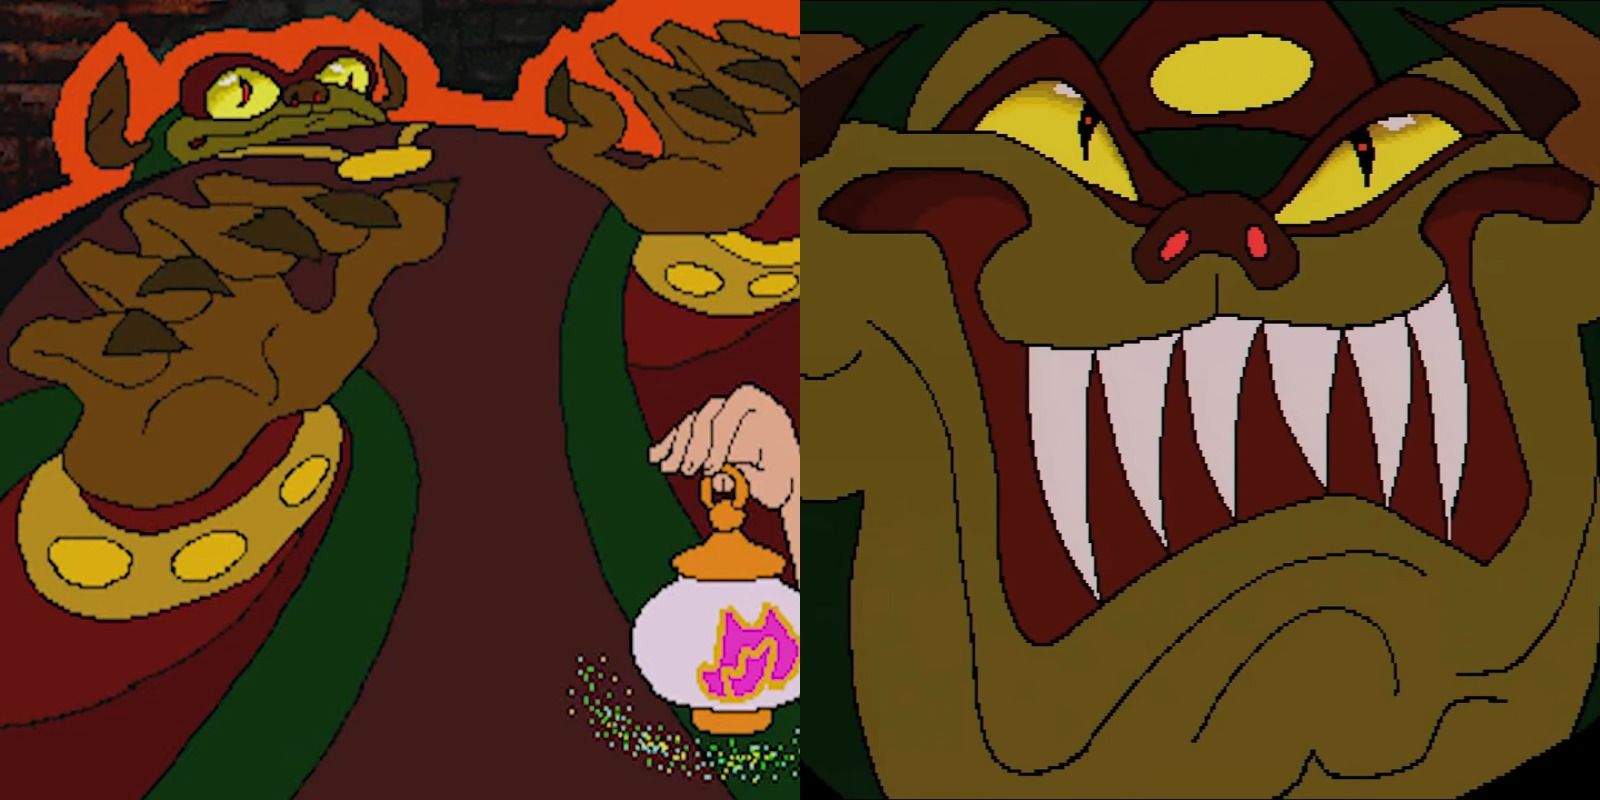 Side-by-side view of Ganon threatening Zelda in Zelda: The Wand Of Gamelon and threatening Link in Link: The Faces Of Evil